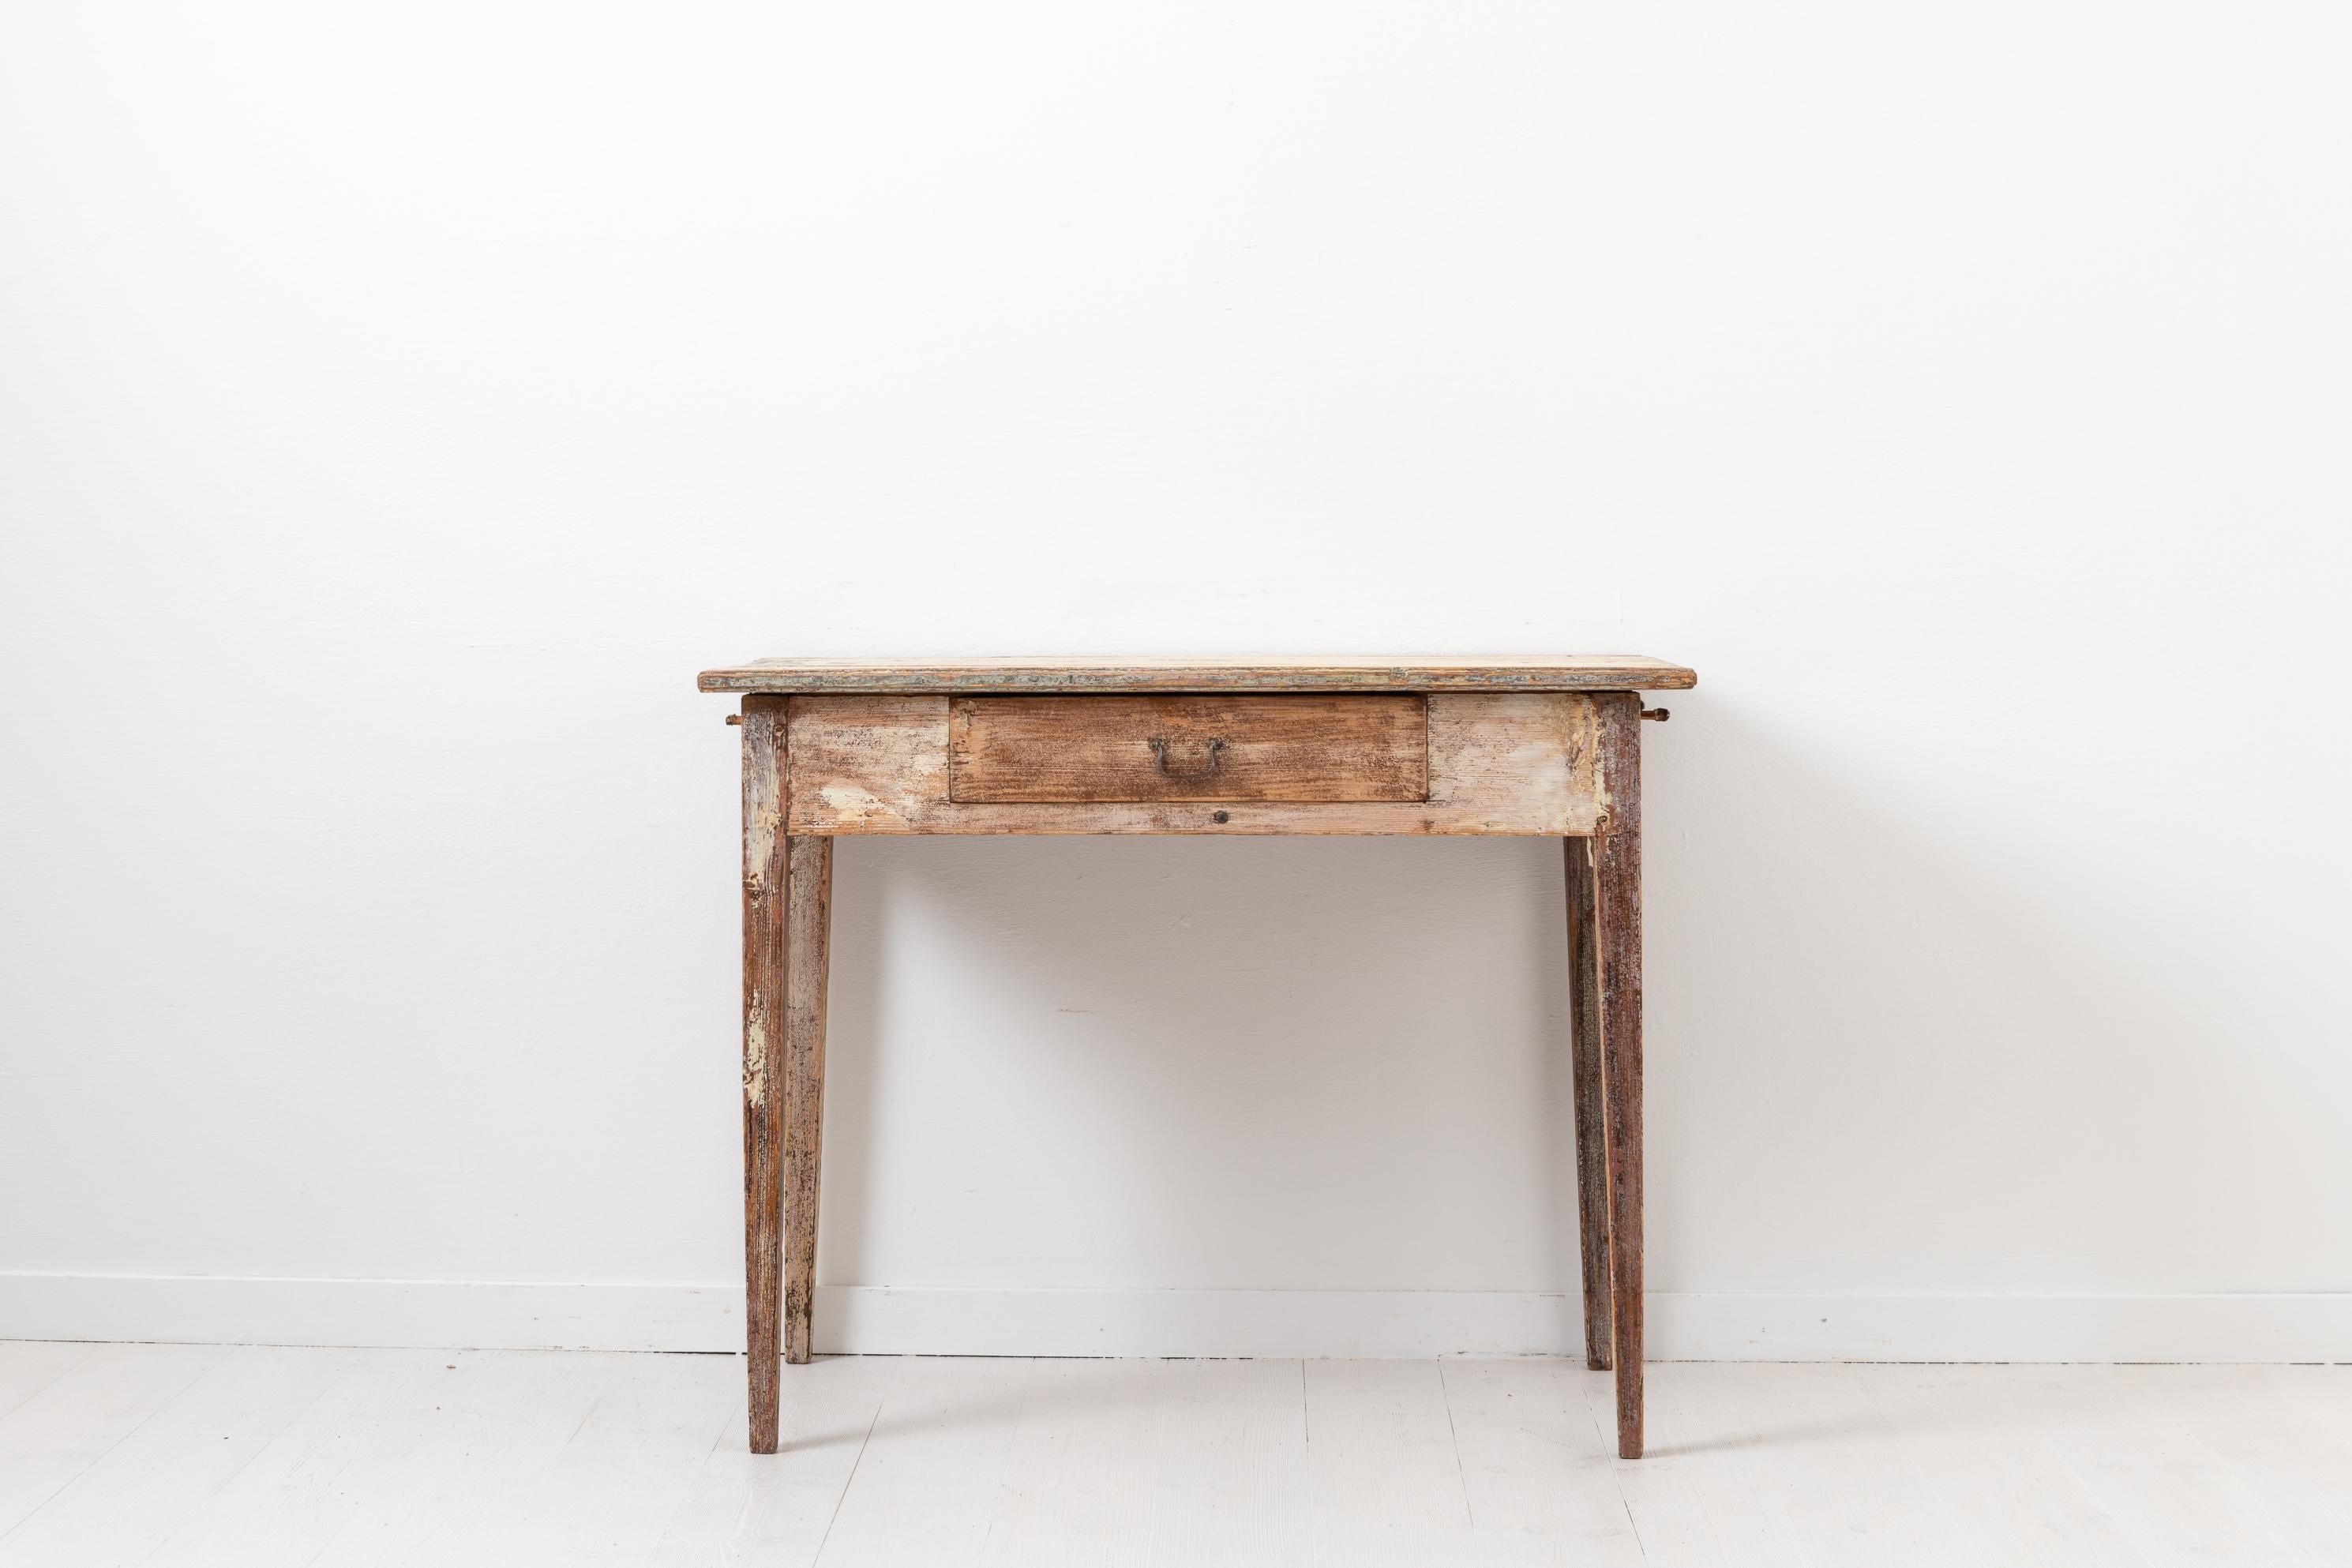 Hand-Crafted Early 19th Century Swedish Desk in Gustavian Style